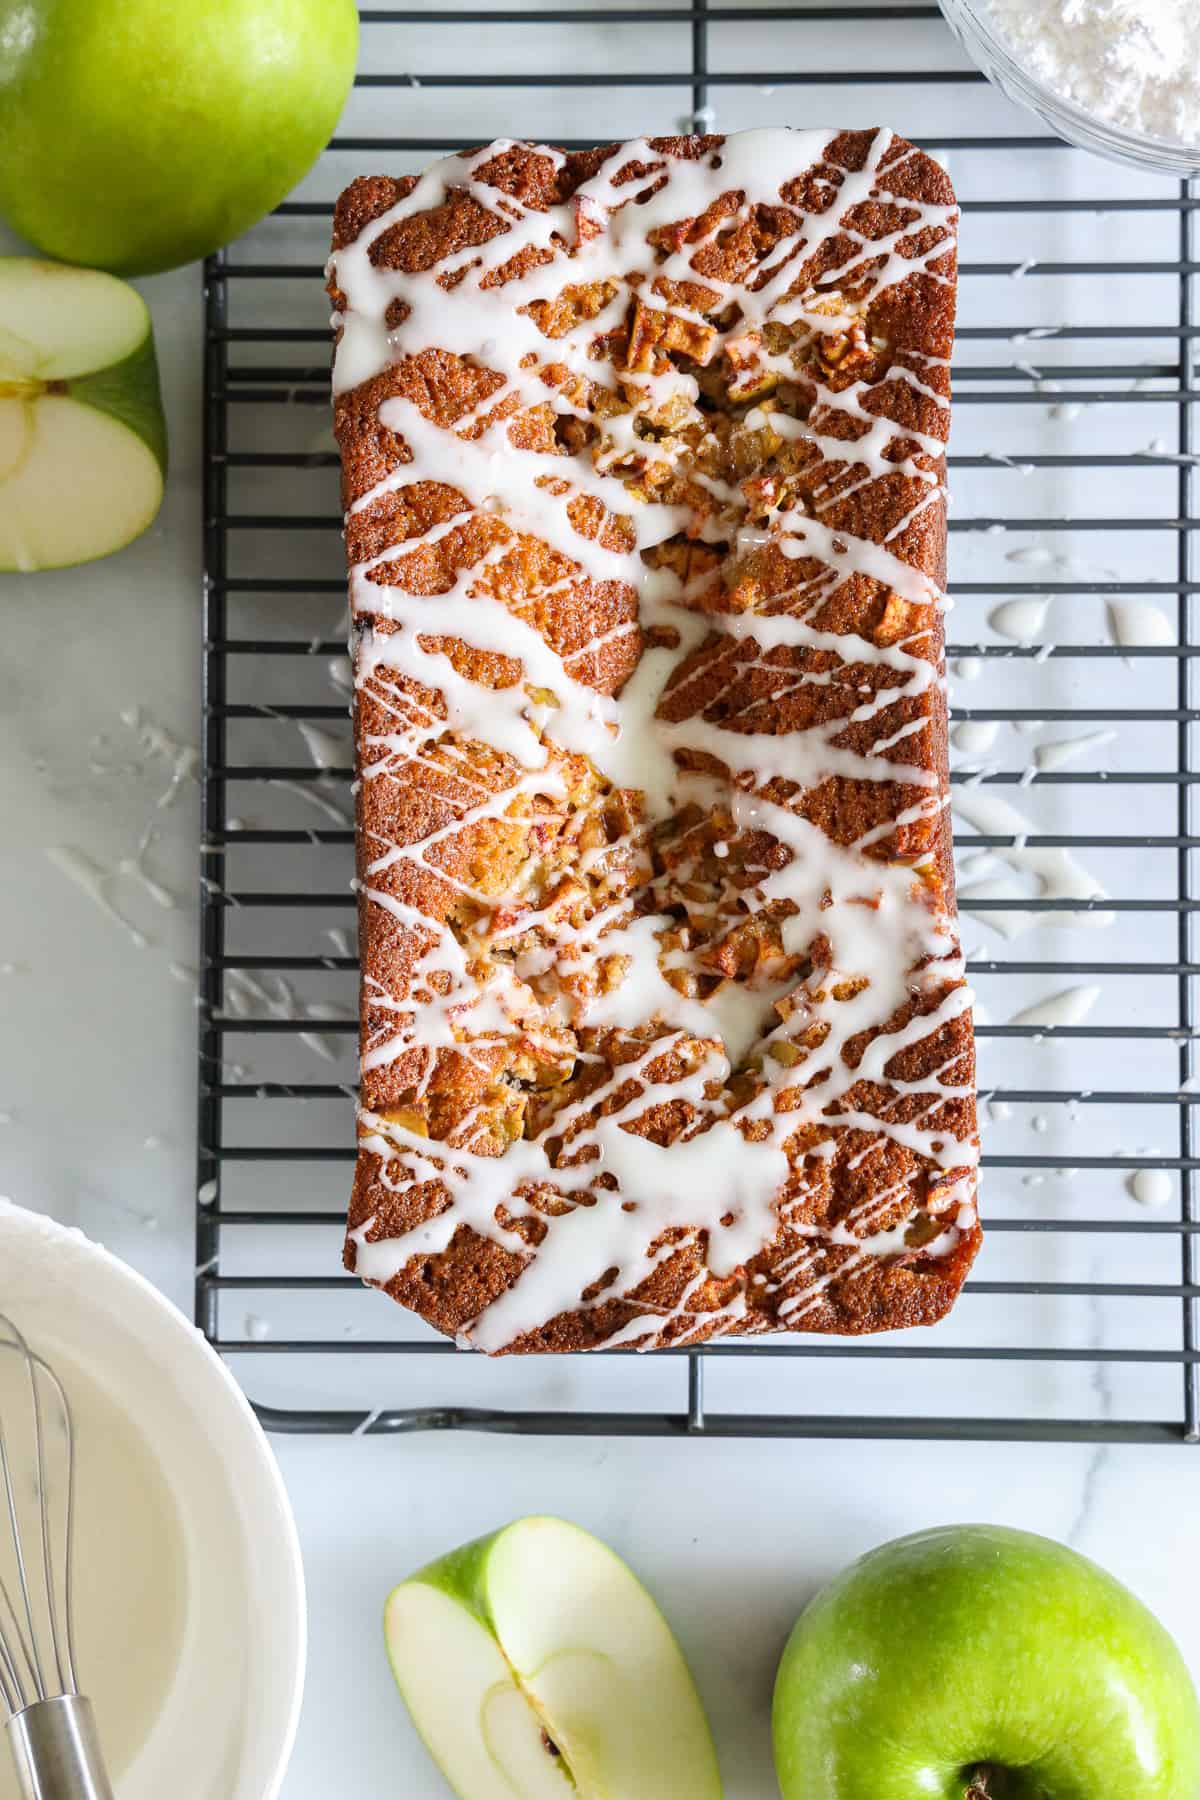 Overhead view of Apple Fritter Bread, with glaze drizzled on top as it sits on a cooling rack, with green apples to the side.